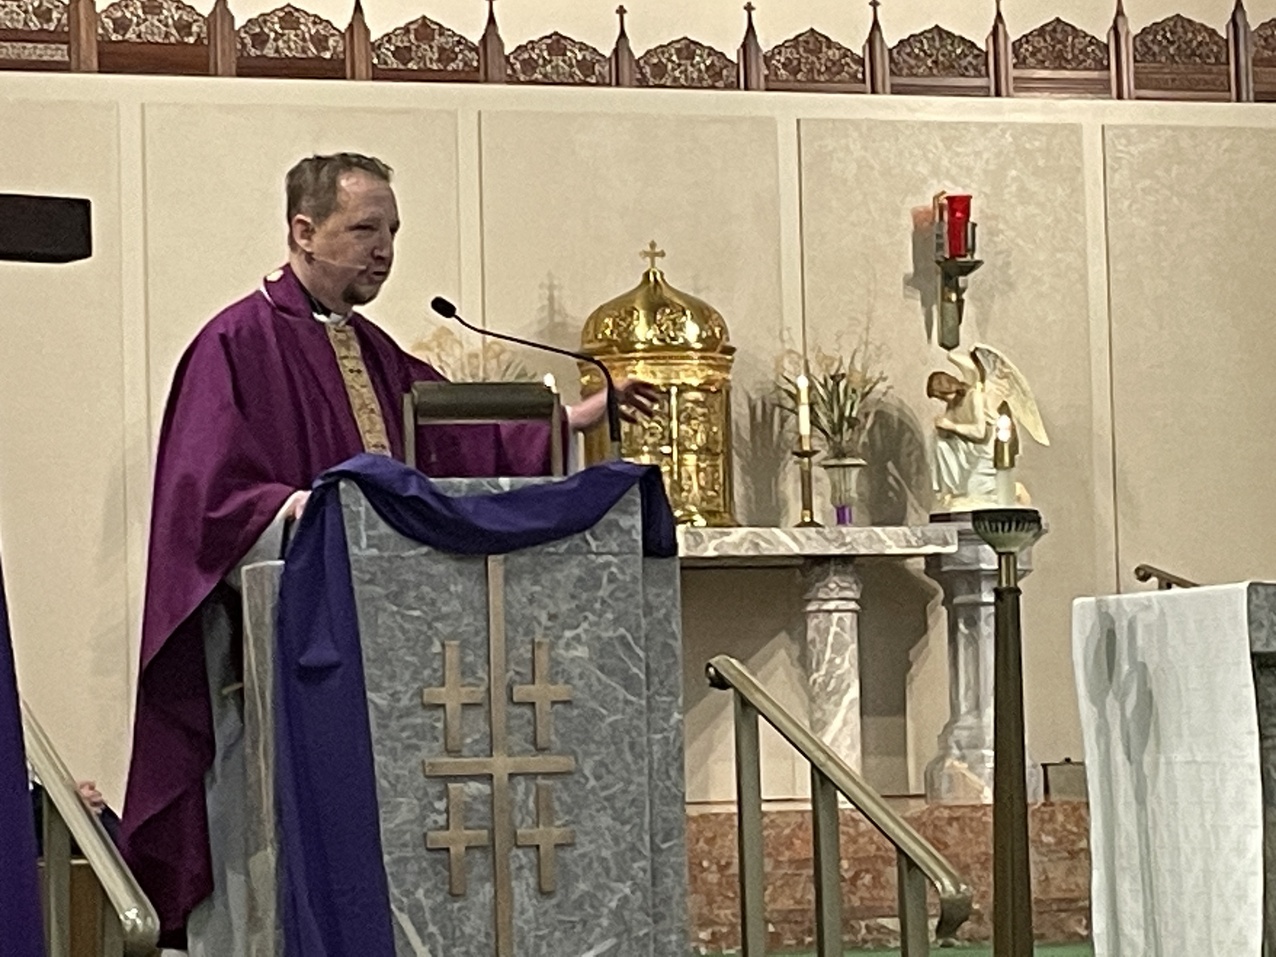 ‘Continue to be a beacon of faith and hope,’ bishop tells St. Patrick West Park parishioners